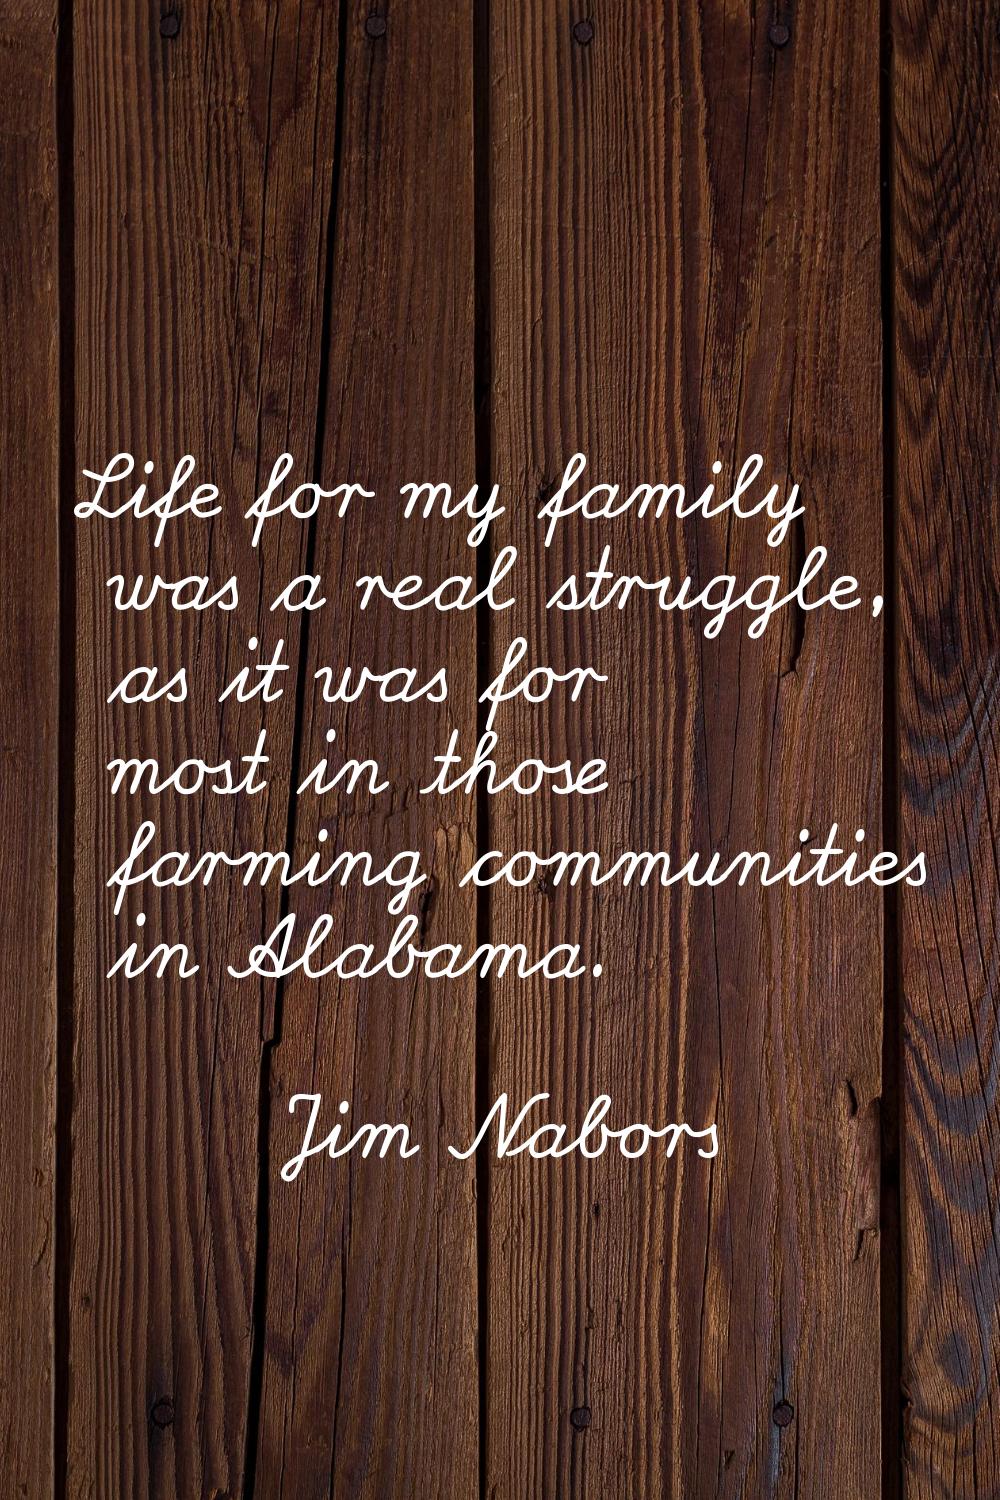 Life for my family was a real struggle, as it was for most in those farming communities in Alabama.